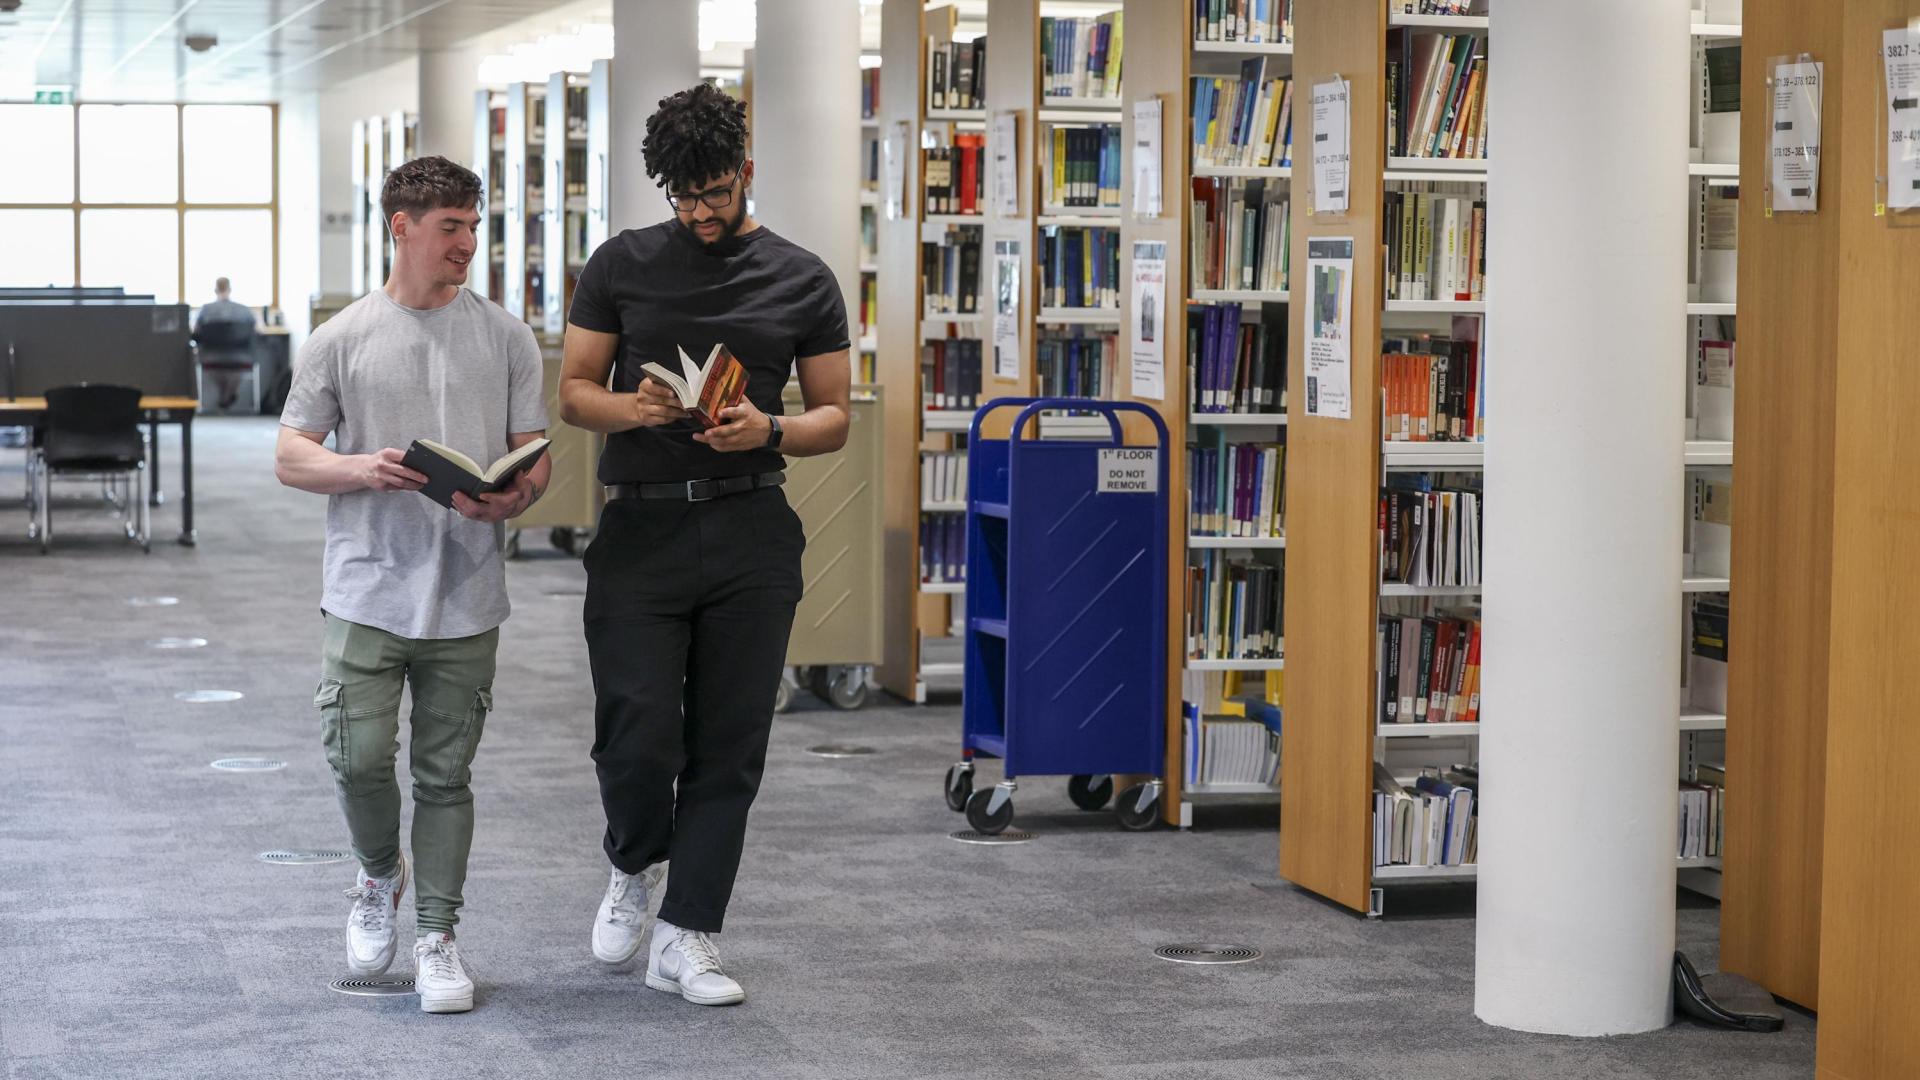 2 students walking and chatting near the book shleves on the first floor of O' Reilly library